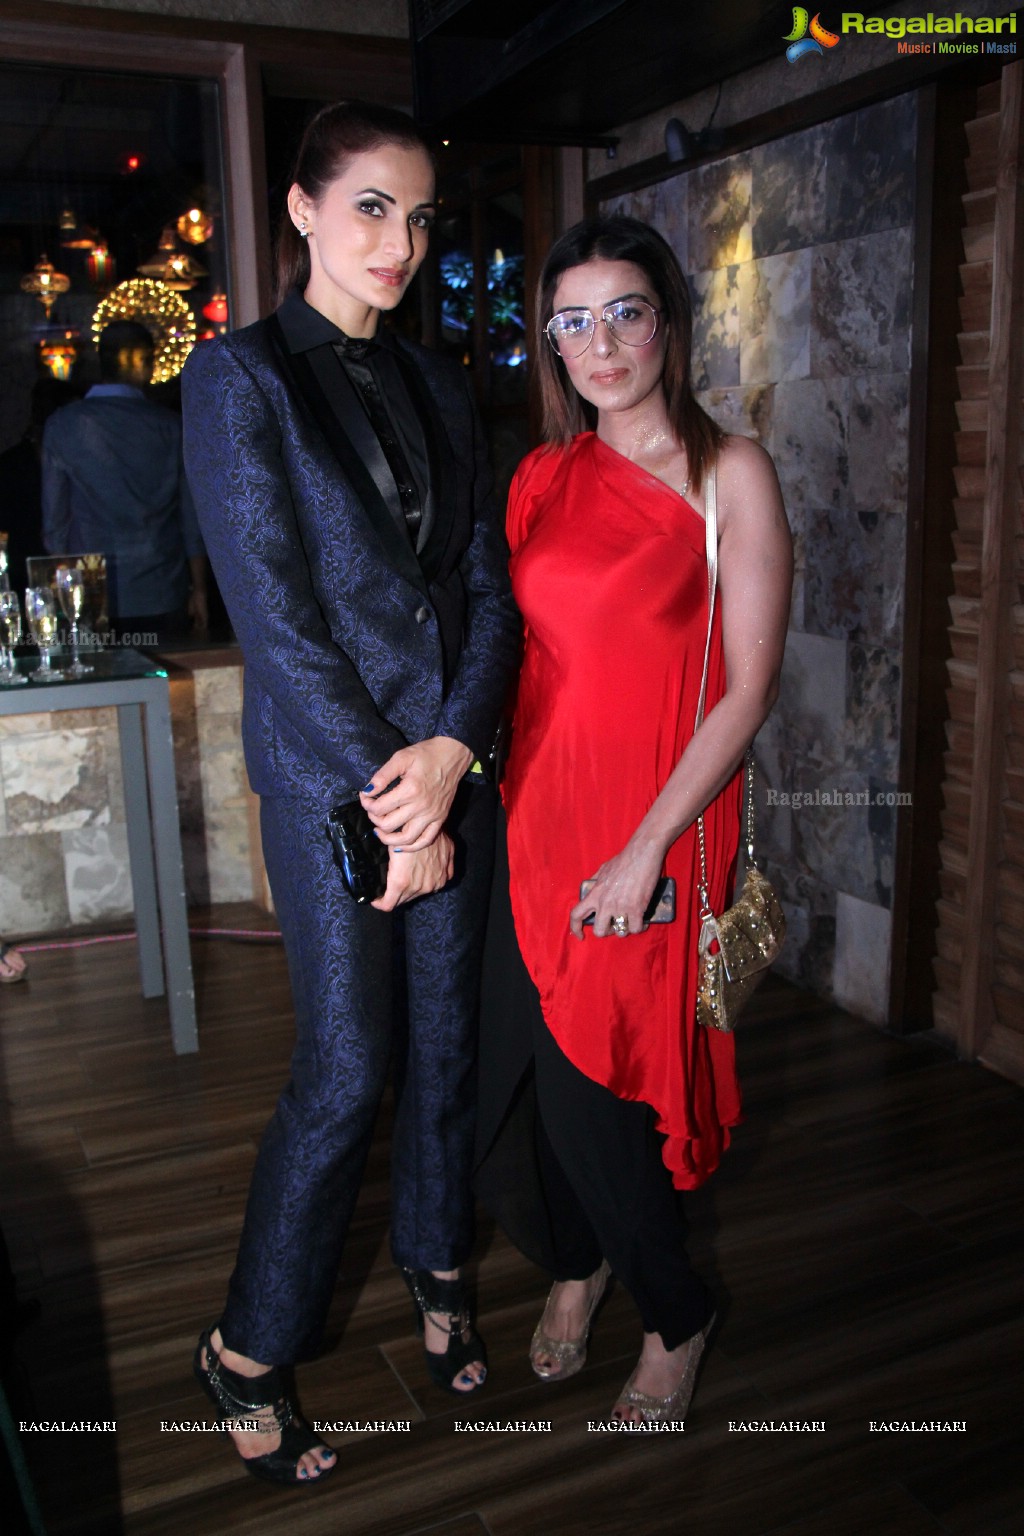 A Night of Exquisite Fashion and Living by Paresh Lamba Signatures & Embassy Group at N Grill